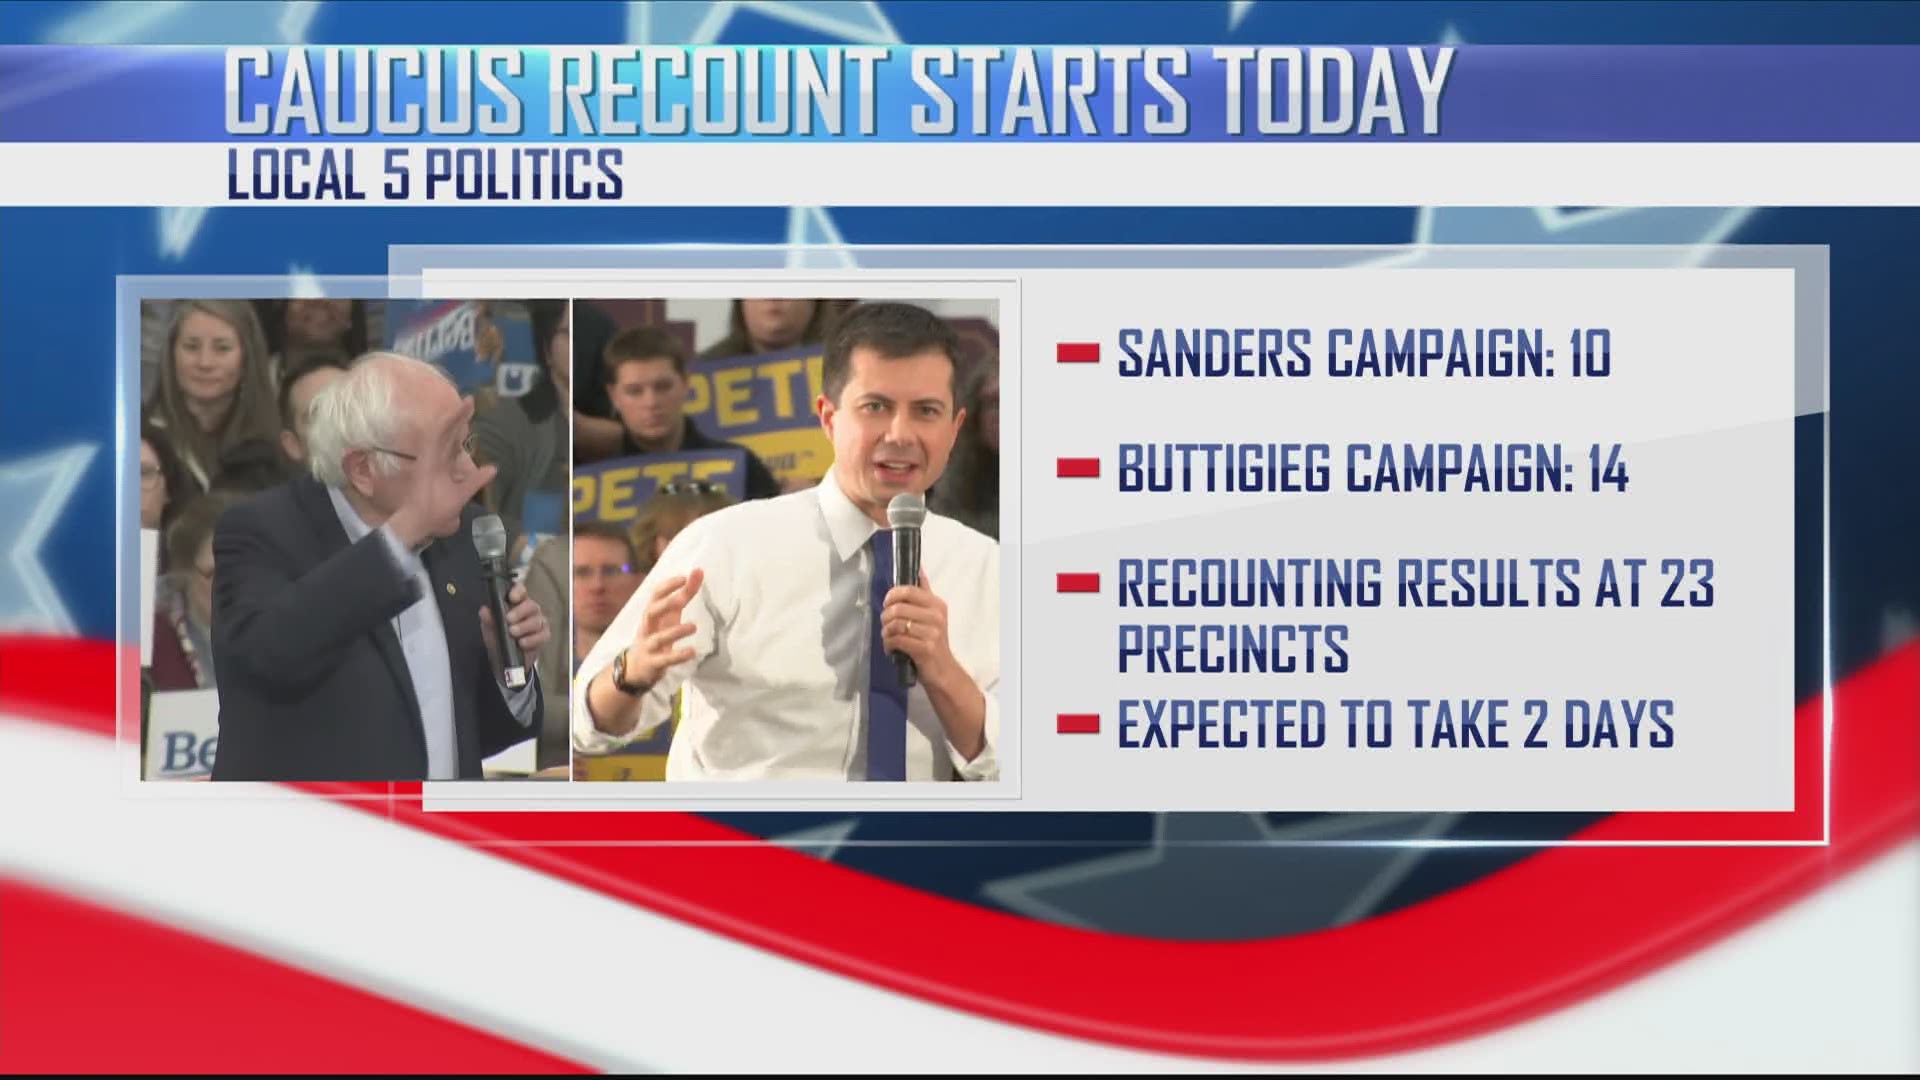 The Buttigieg and Sanders campaigns requested a recount from a total of 24 caucus precincts.